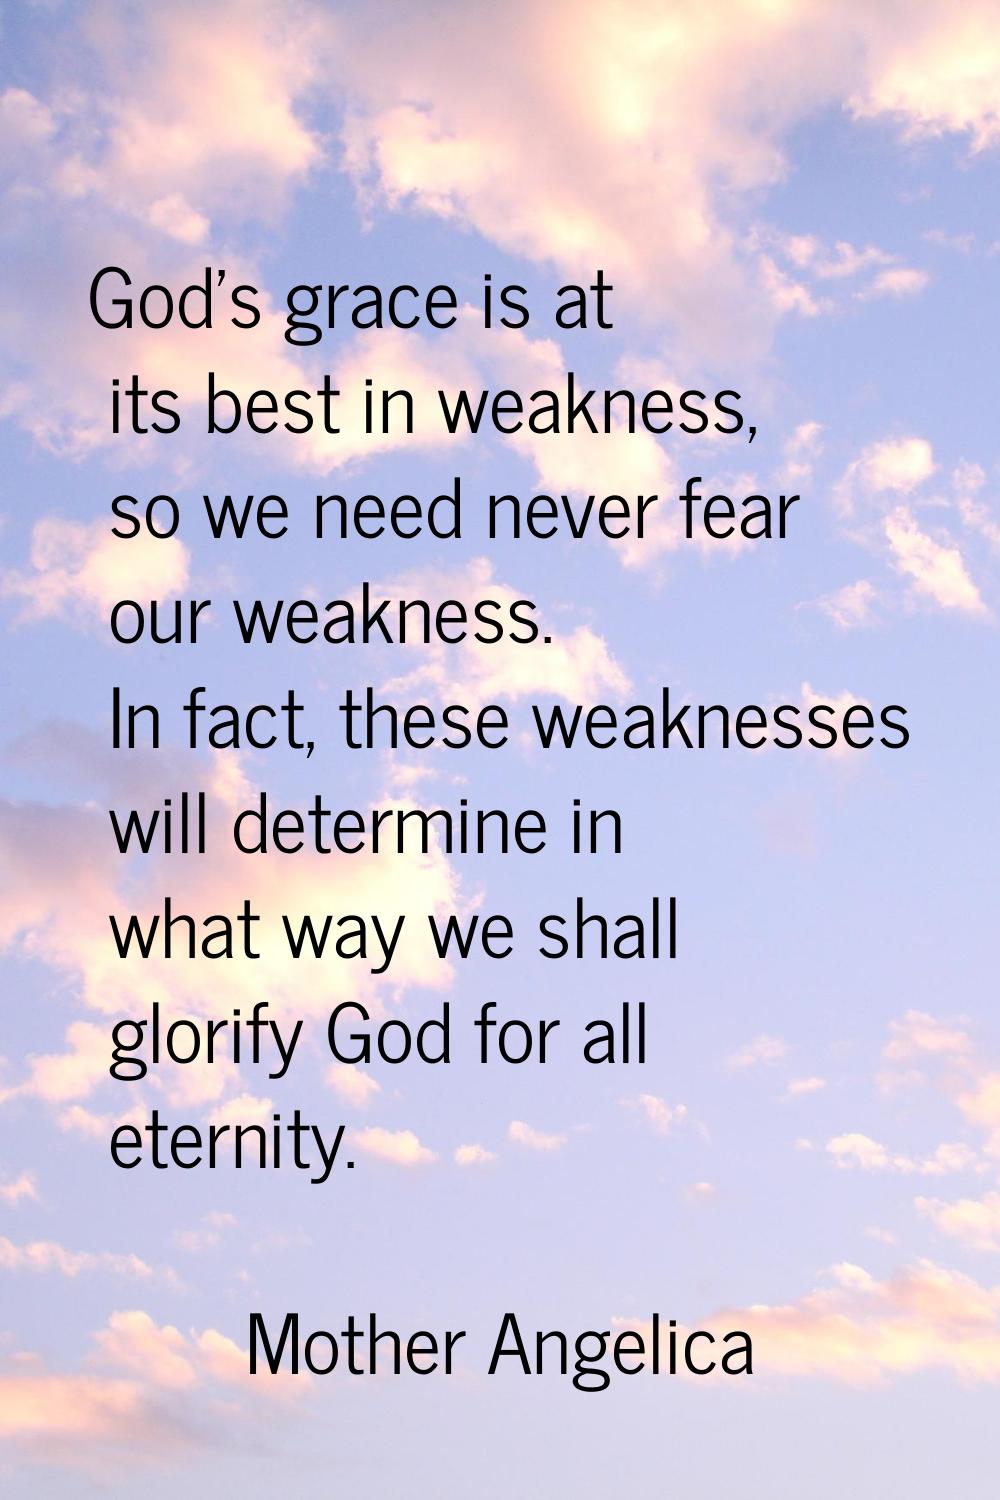 God's grace is at its best in weakness, so we need never fear our weakness. In fact, these weakness